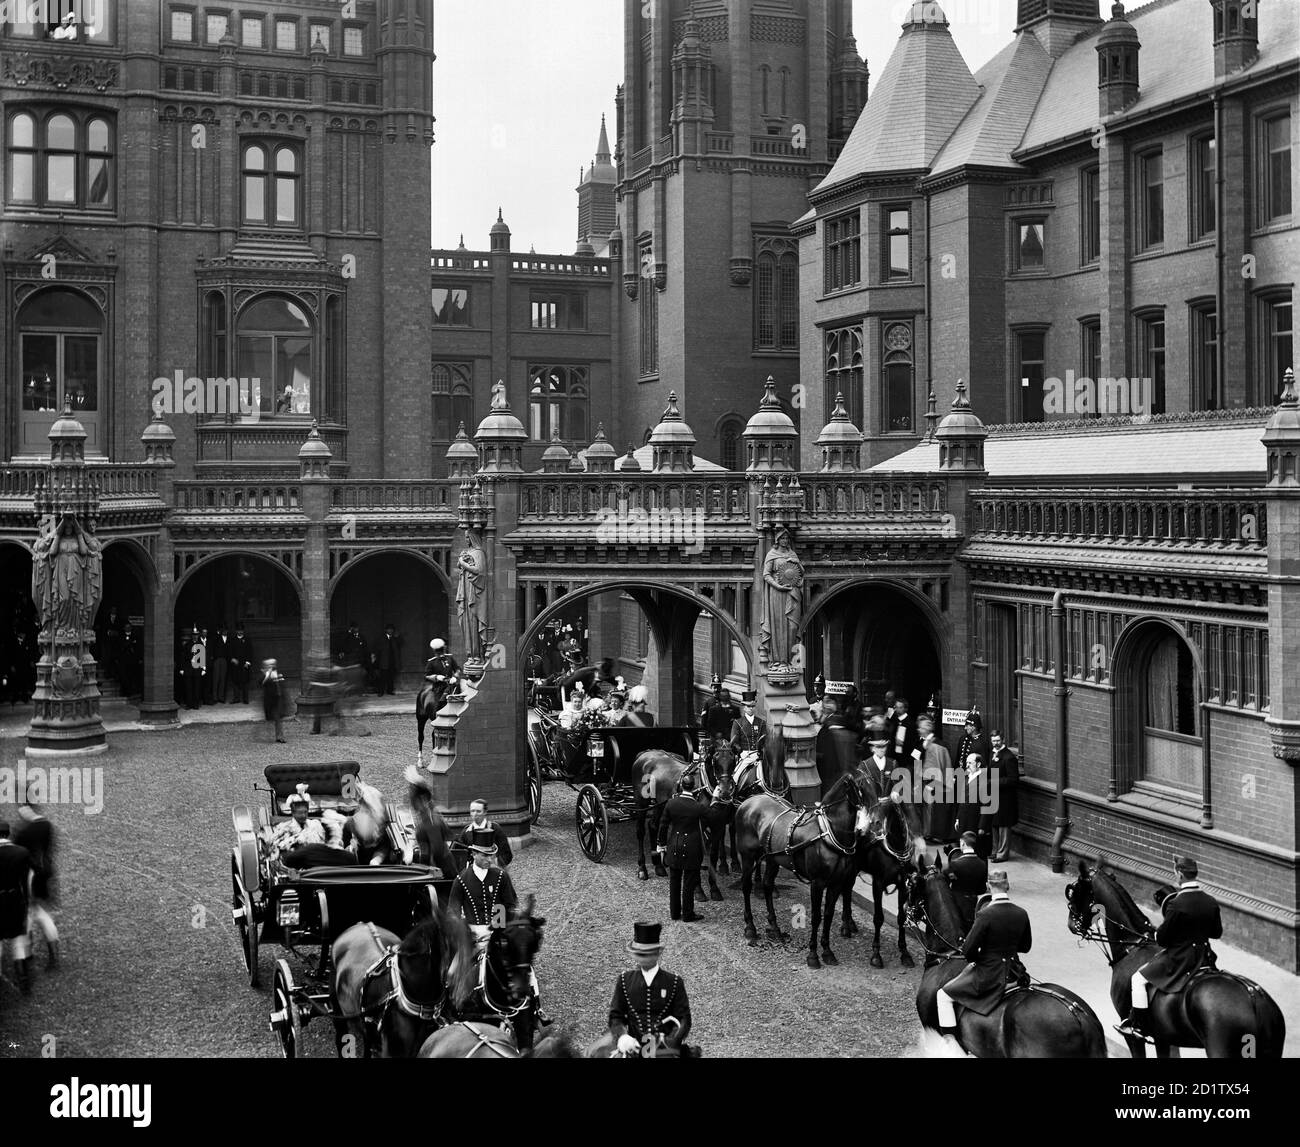 BIRMINGHAM GENERAL HOSPITAL, Steelhouse Lane, Small Heath, Birmingham. Princess Christian of Schleswig-Holstein (formerly Princess Helena, daughter of Queen Victoria) arriving by carriage at Birmingham General Hospital during the opening ceremony. Princess Christian became president of the Royal British Nurses' Association and undertook an extensive programme of royal engagements including the opening of William Henman's General Hospital. Photographed by Bedford Lemere and Co. July 1897. Stock Photo